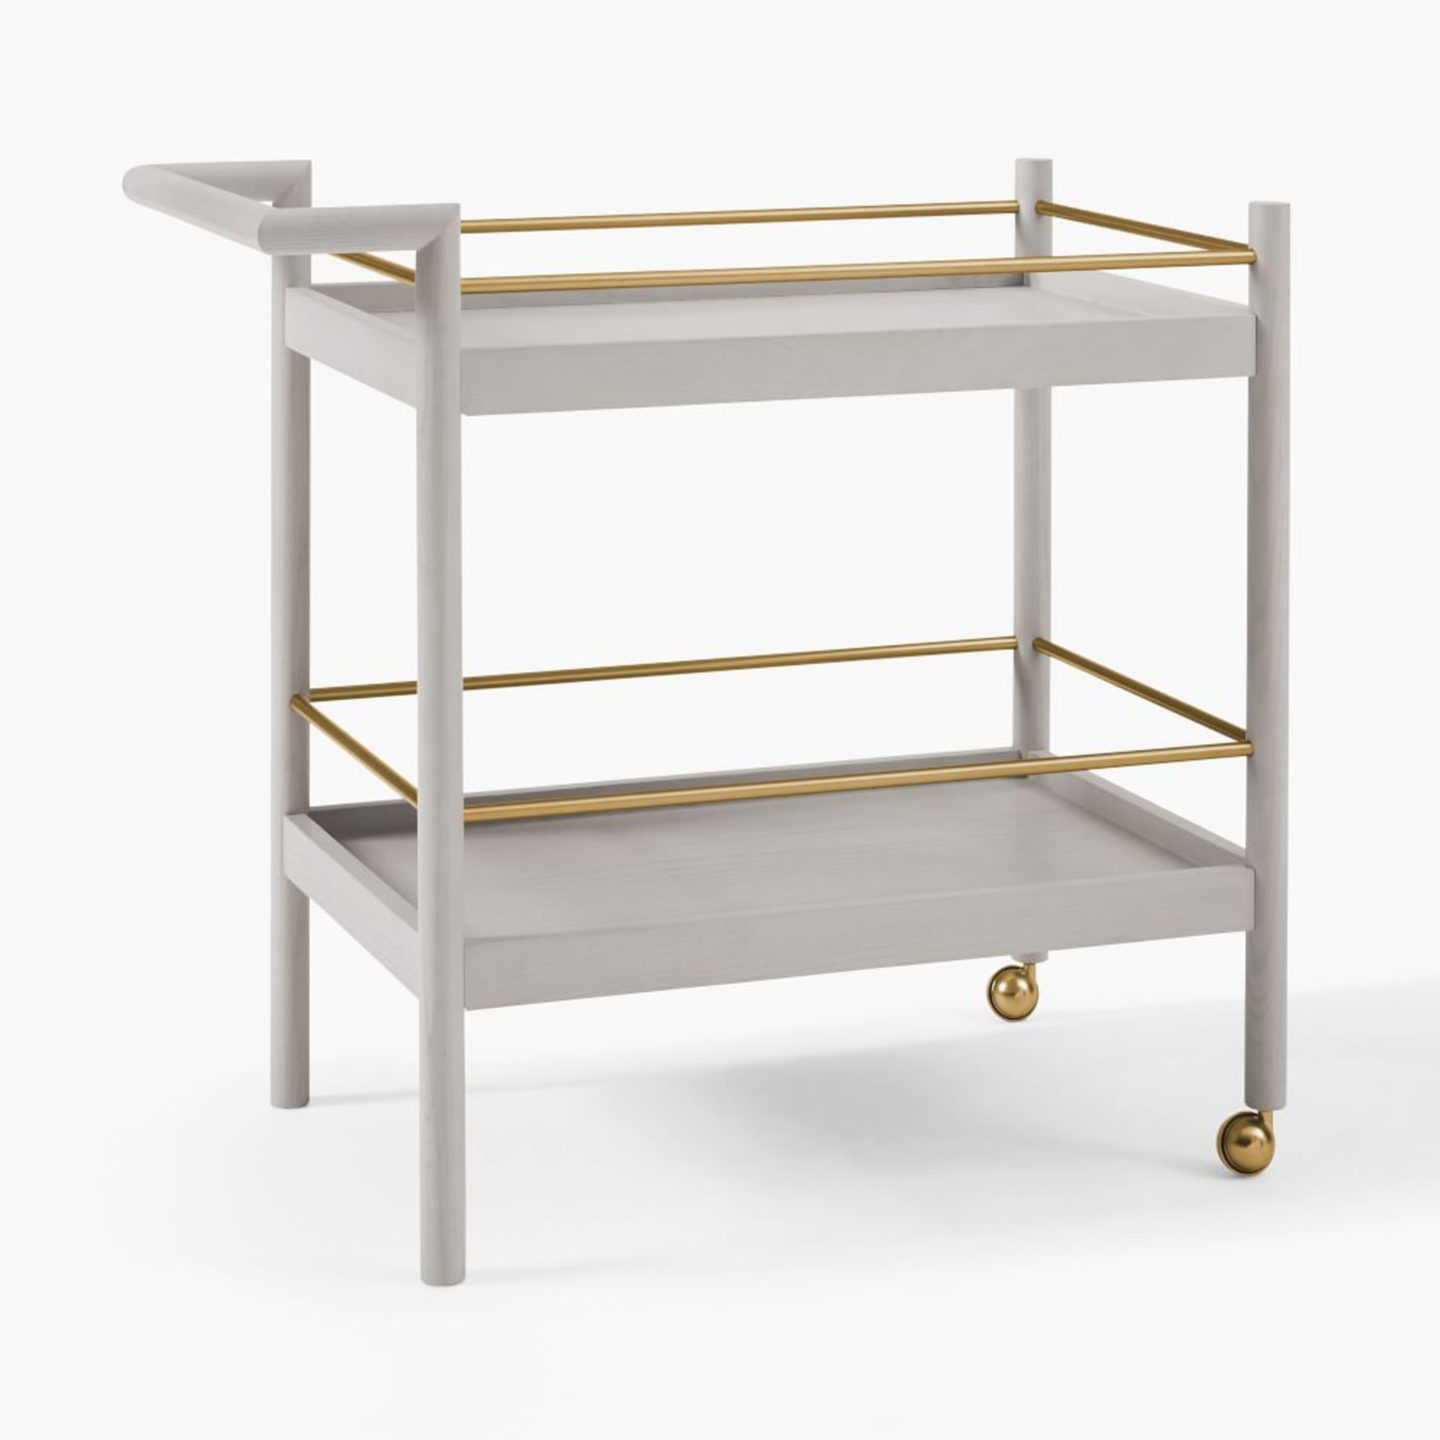 Mid-Century Bar Cart recalls the clean-lined aesthetic of the 1950s and '60s